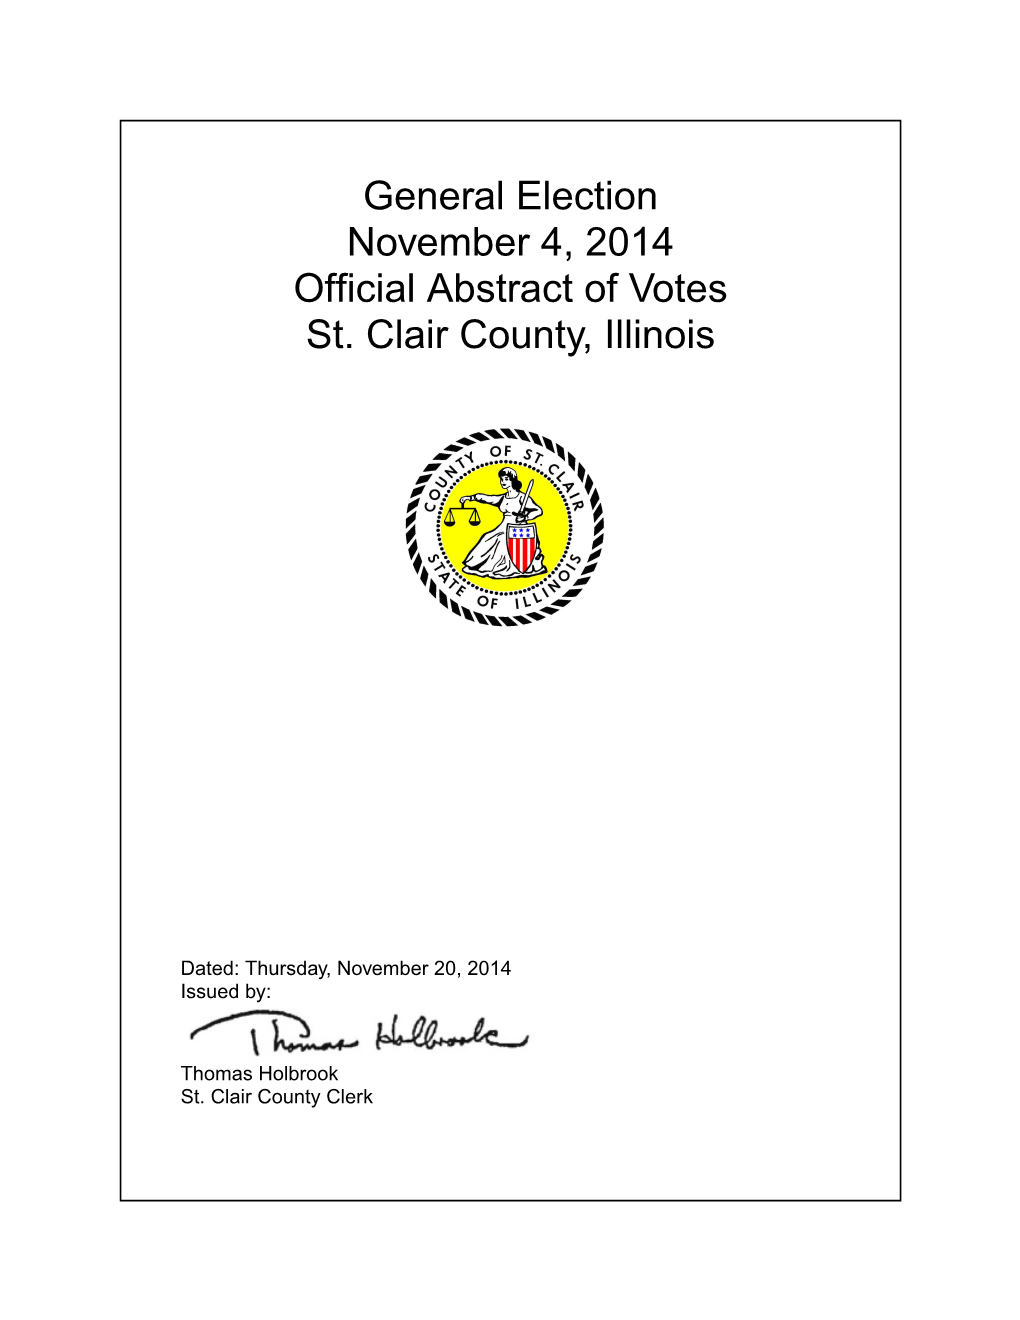 General Election November 4, 2014 Official Abstract of Votes St. Clair County, Illinois